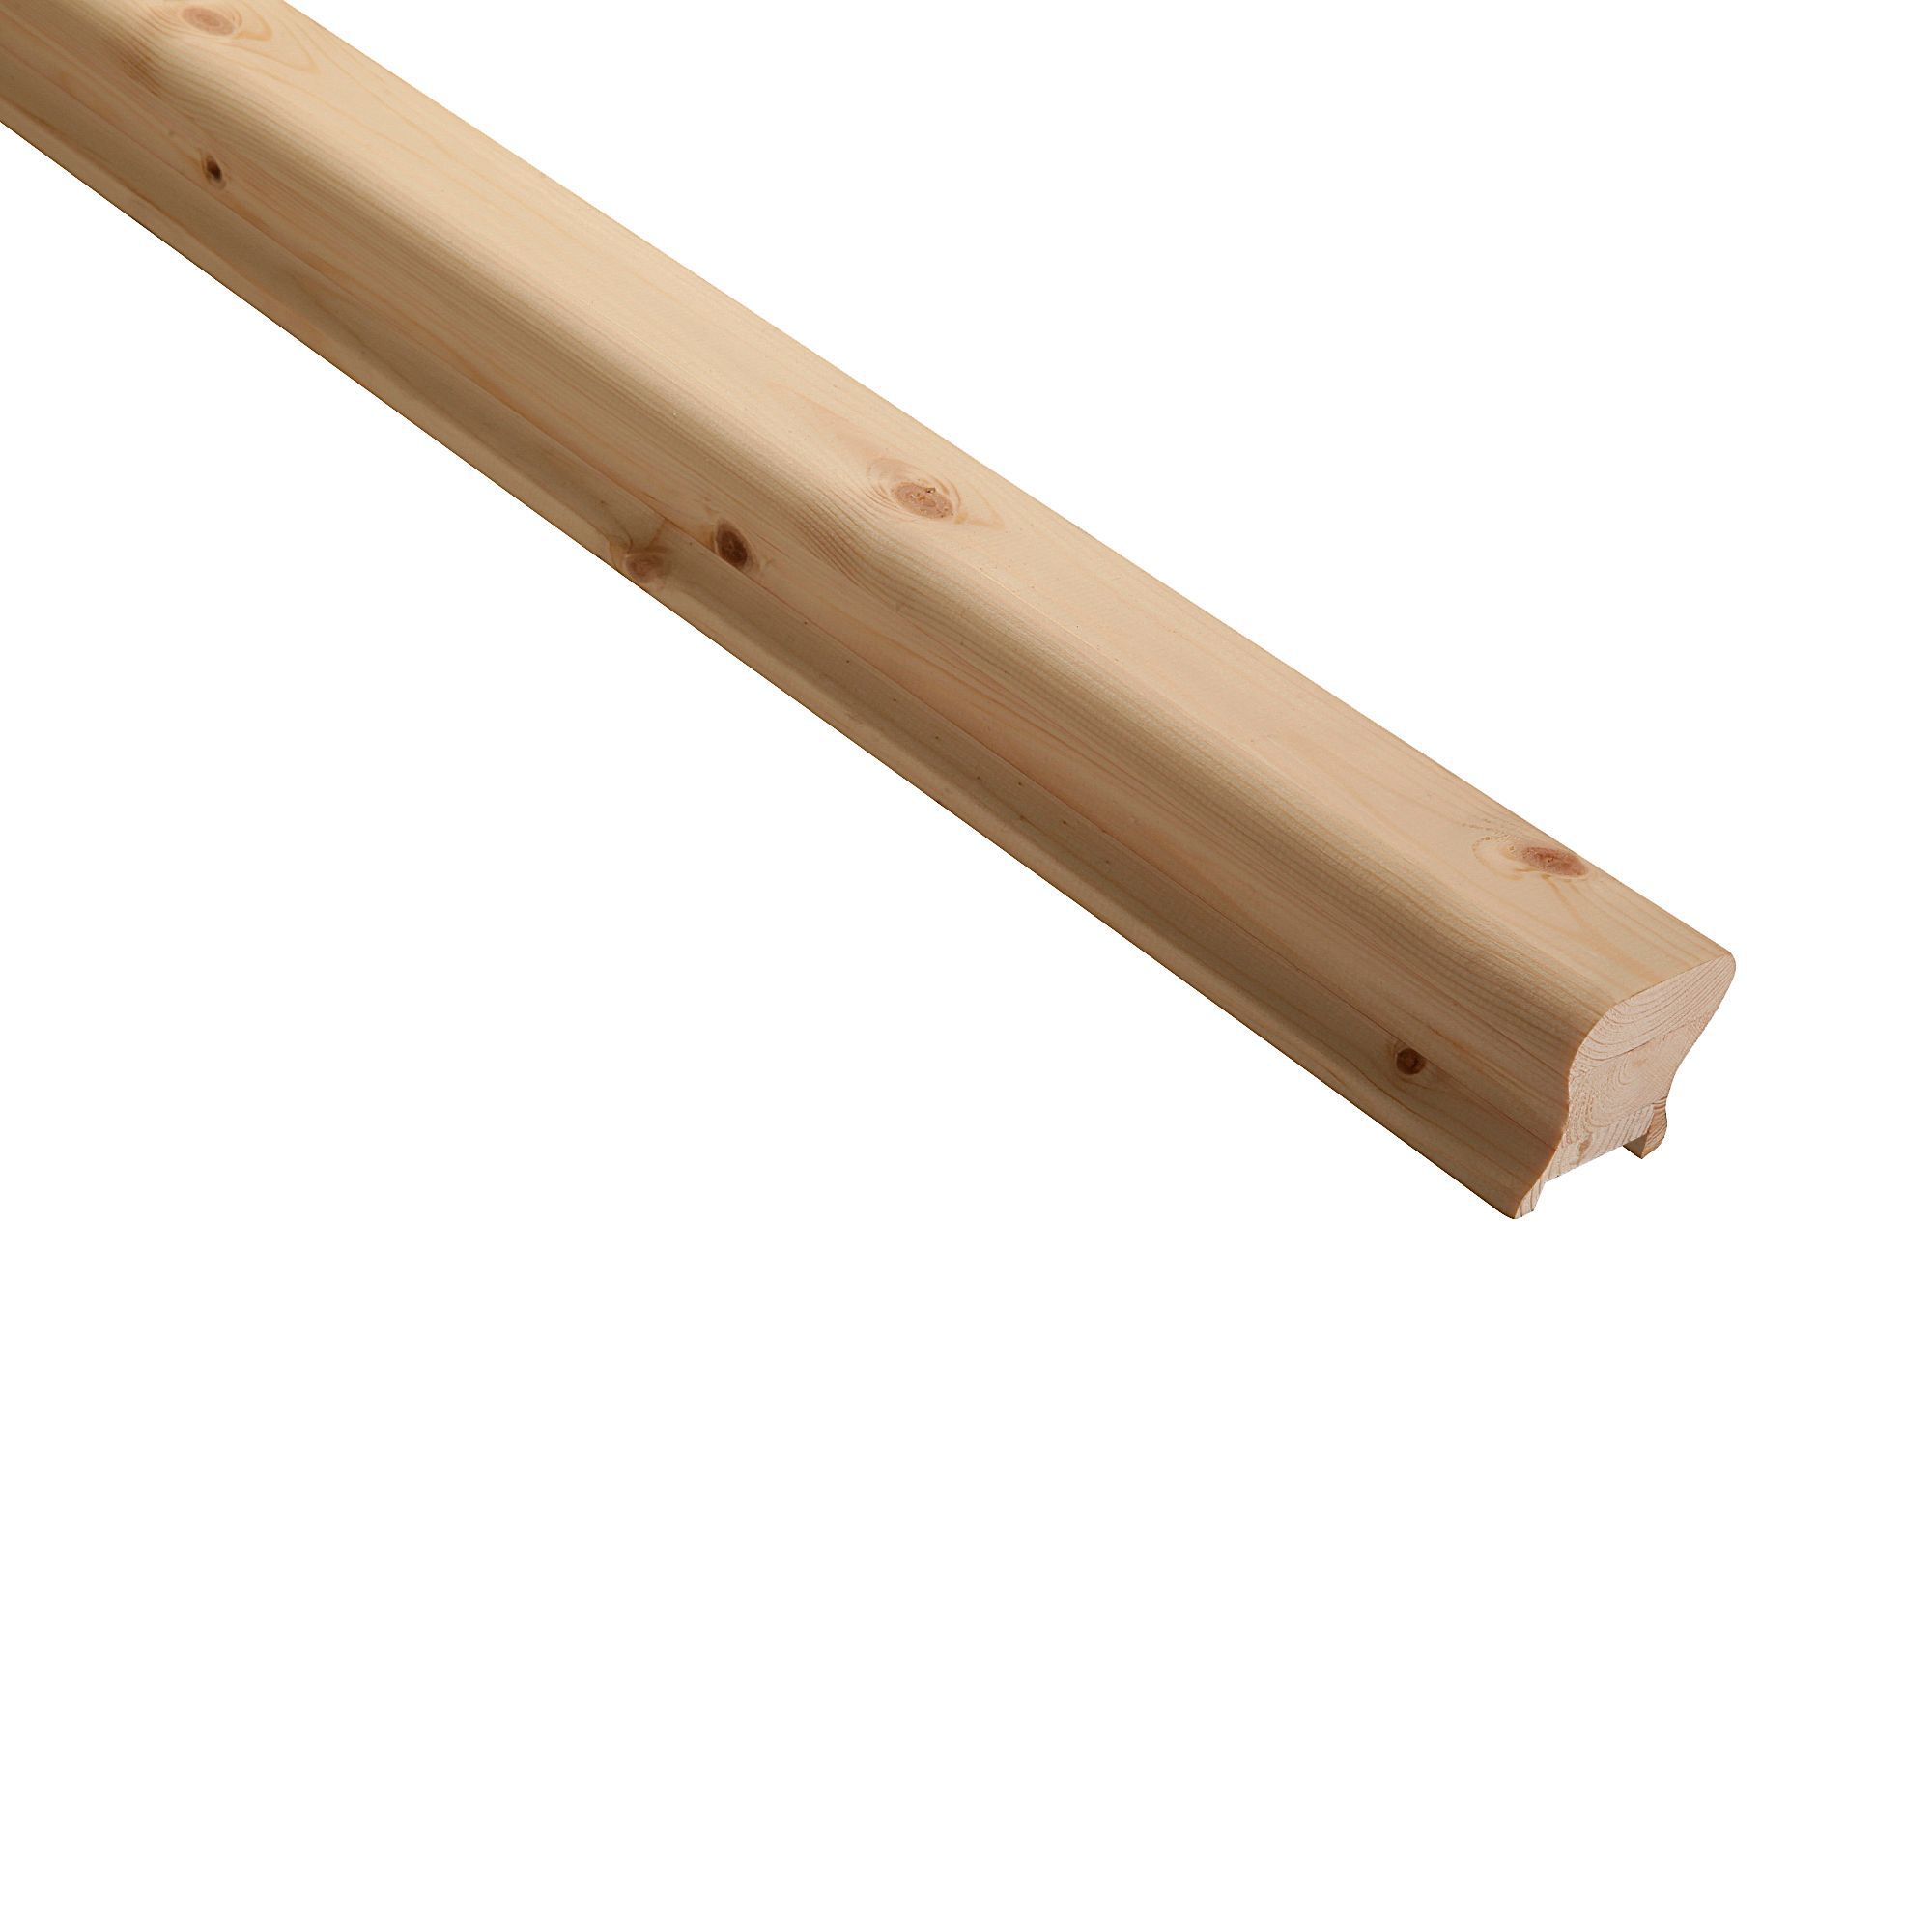 Cheshire Mouldings Traditional Pine 41mm Heavy Handrail, (L)3.6M (W)59mm